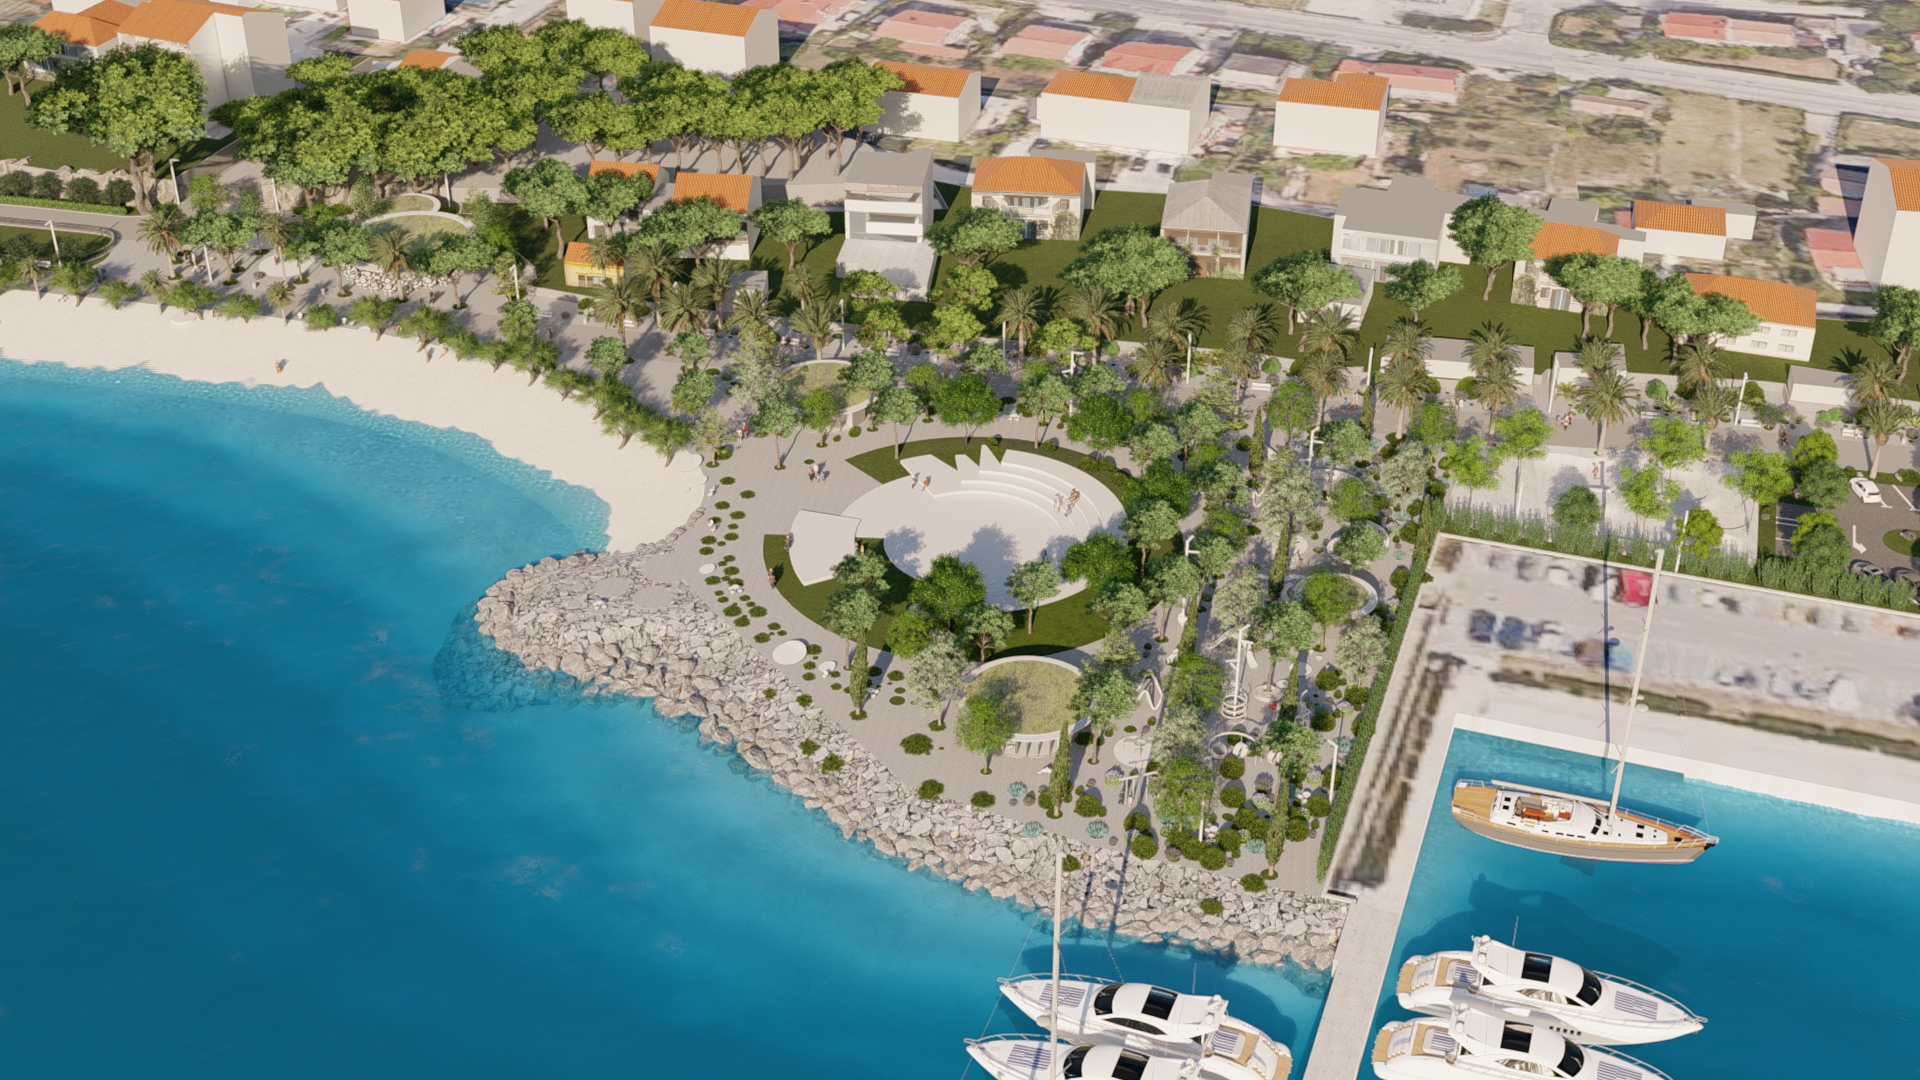 VIDEO: Croatian town of Kaštela to get new square with amphitheatre, park  